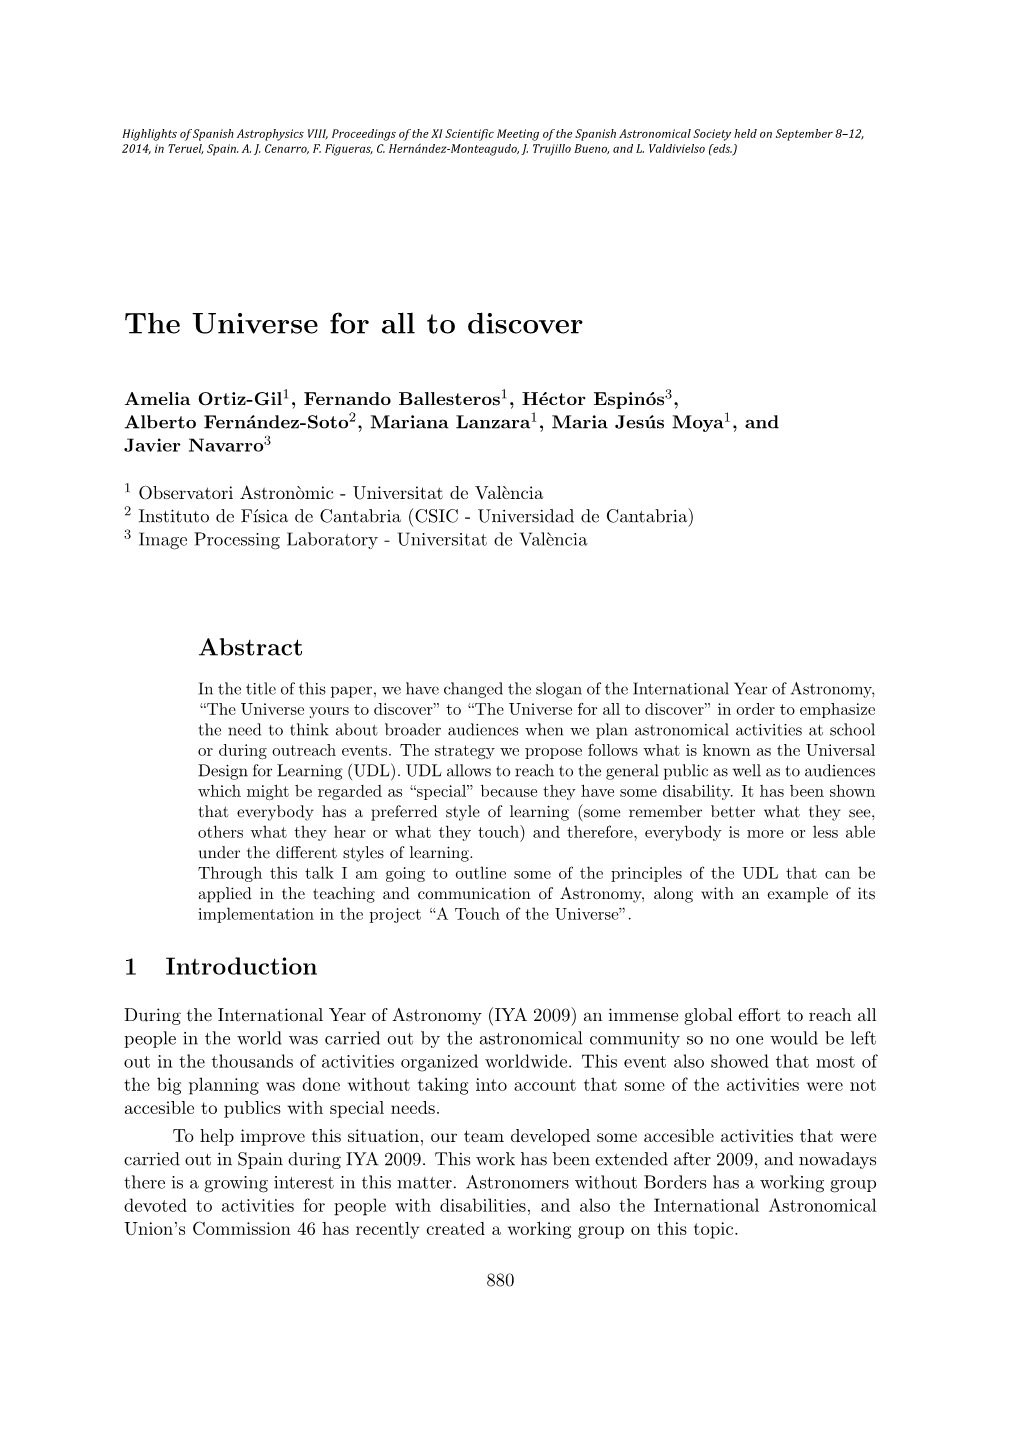 The Universe for All to Discover